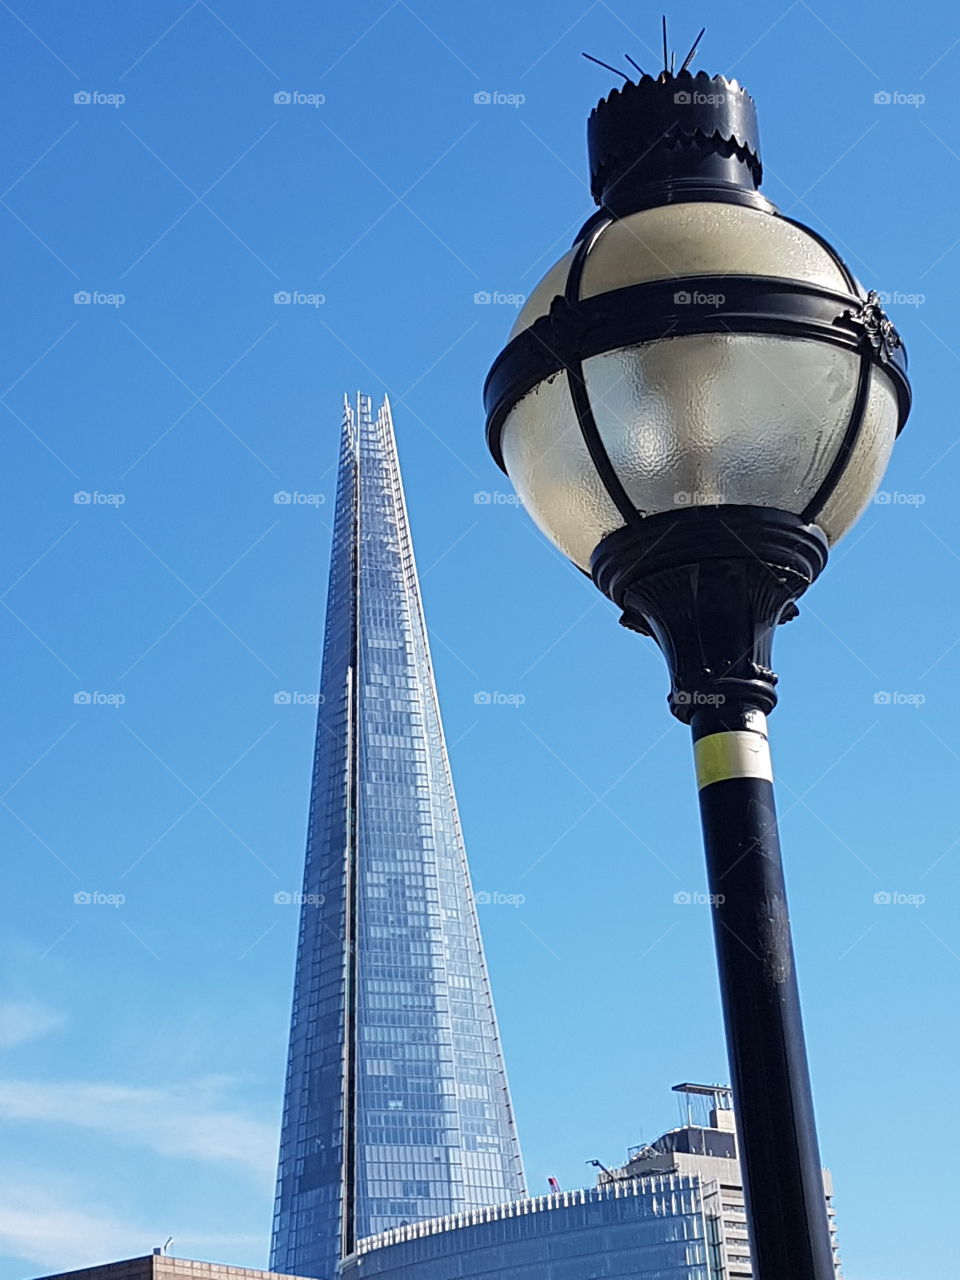 The Shard and a Lamppost in London